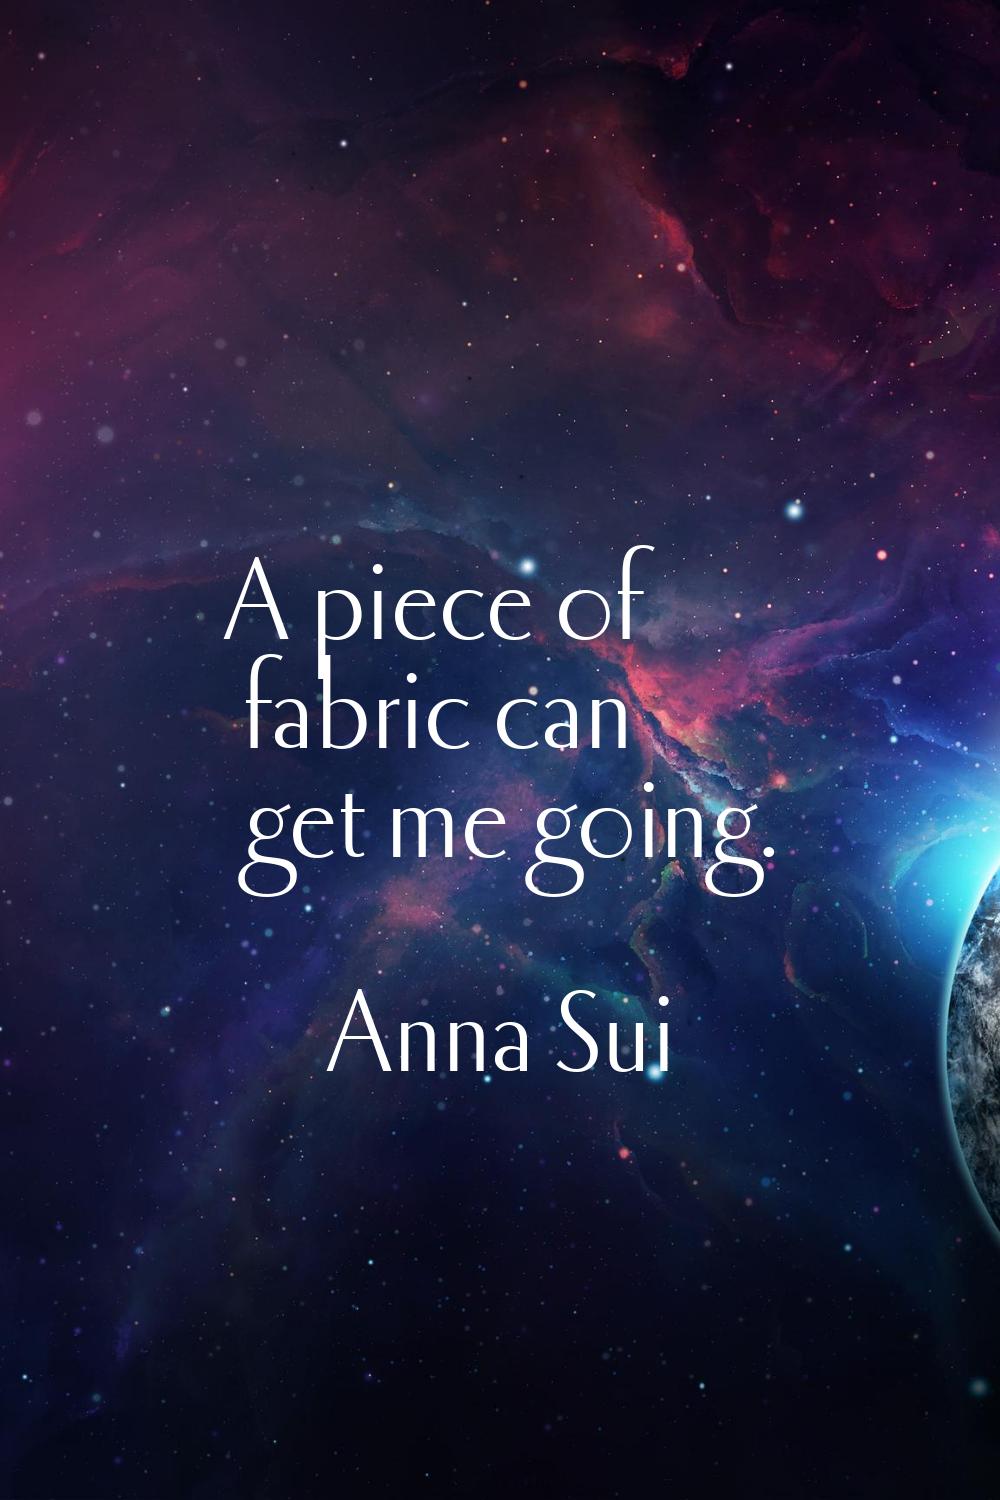 A piece of fabric can get me going.